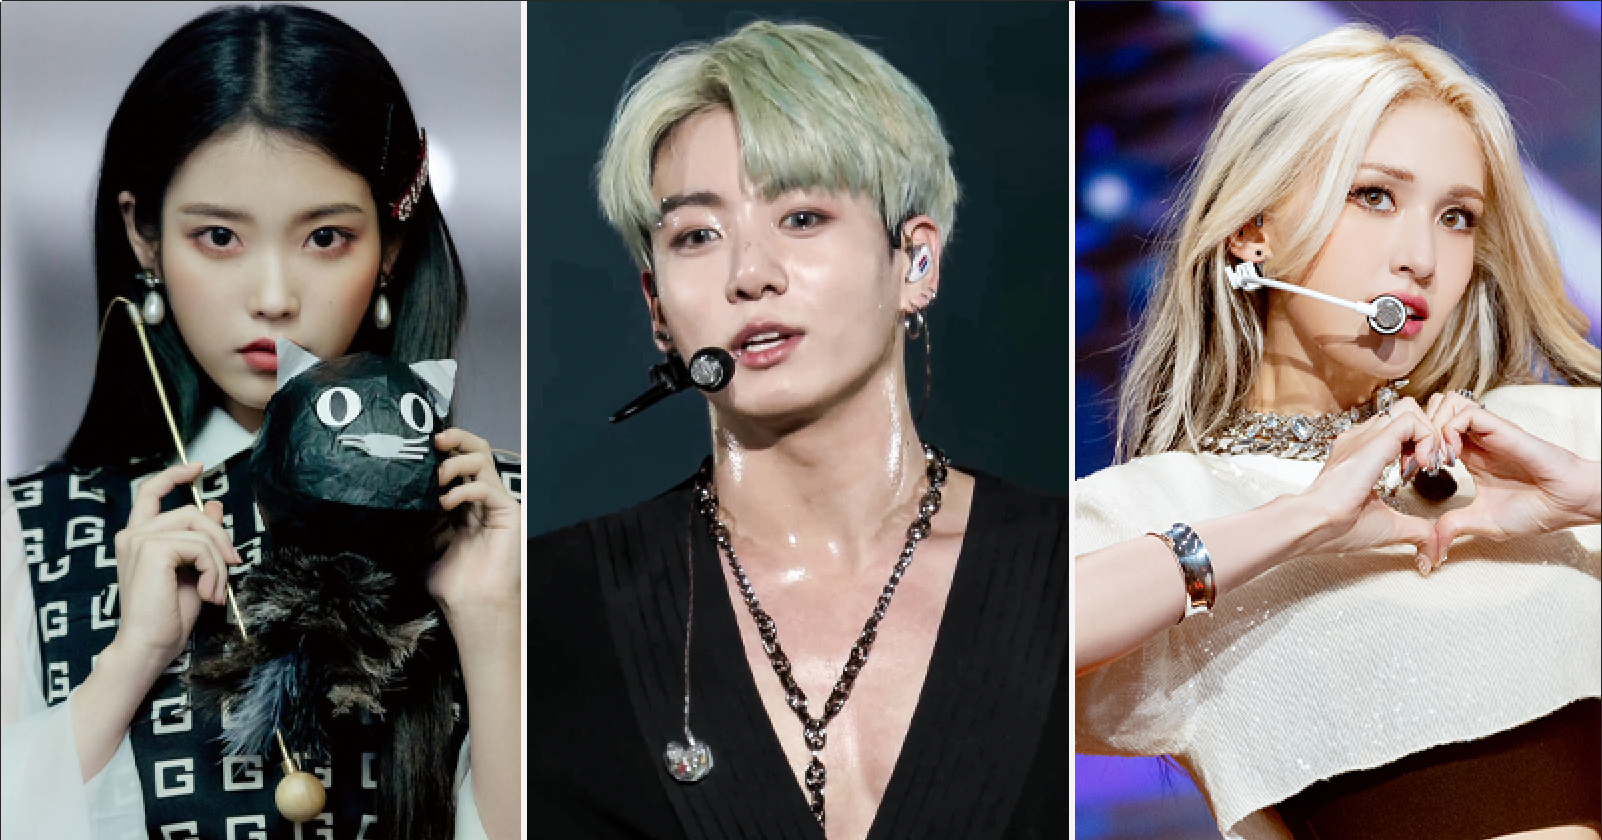 The Top 7 Artists Of 2021 According To K-Pop Industry Insiders